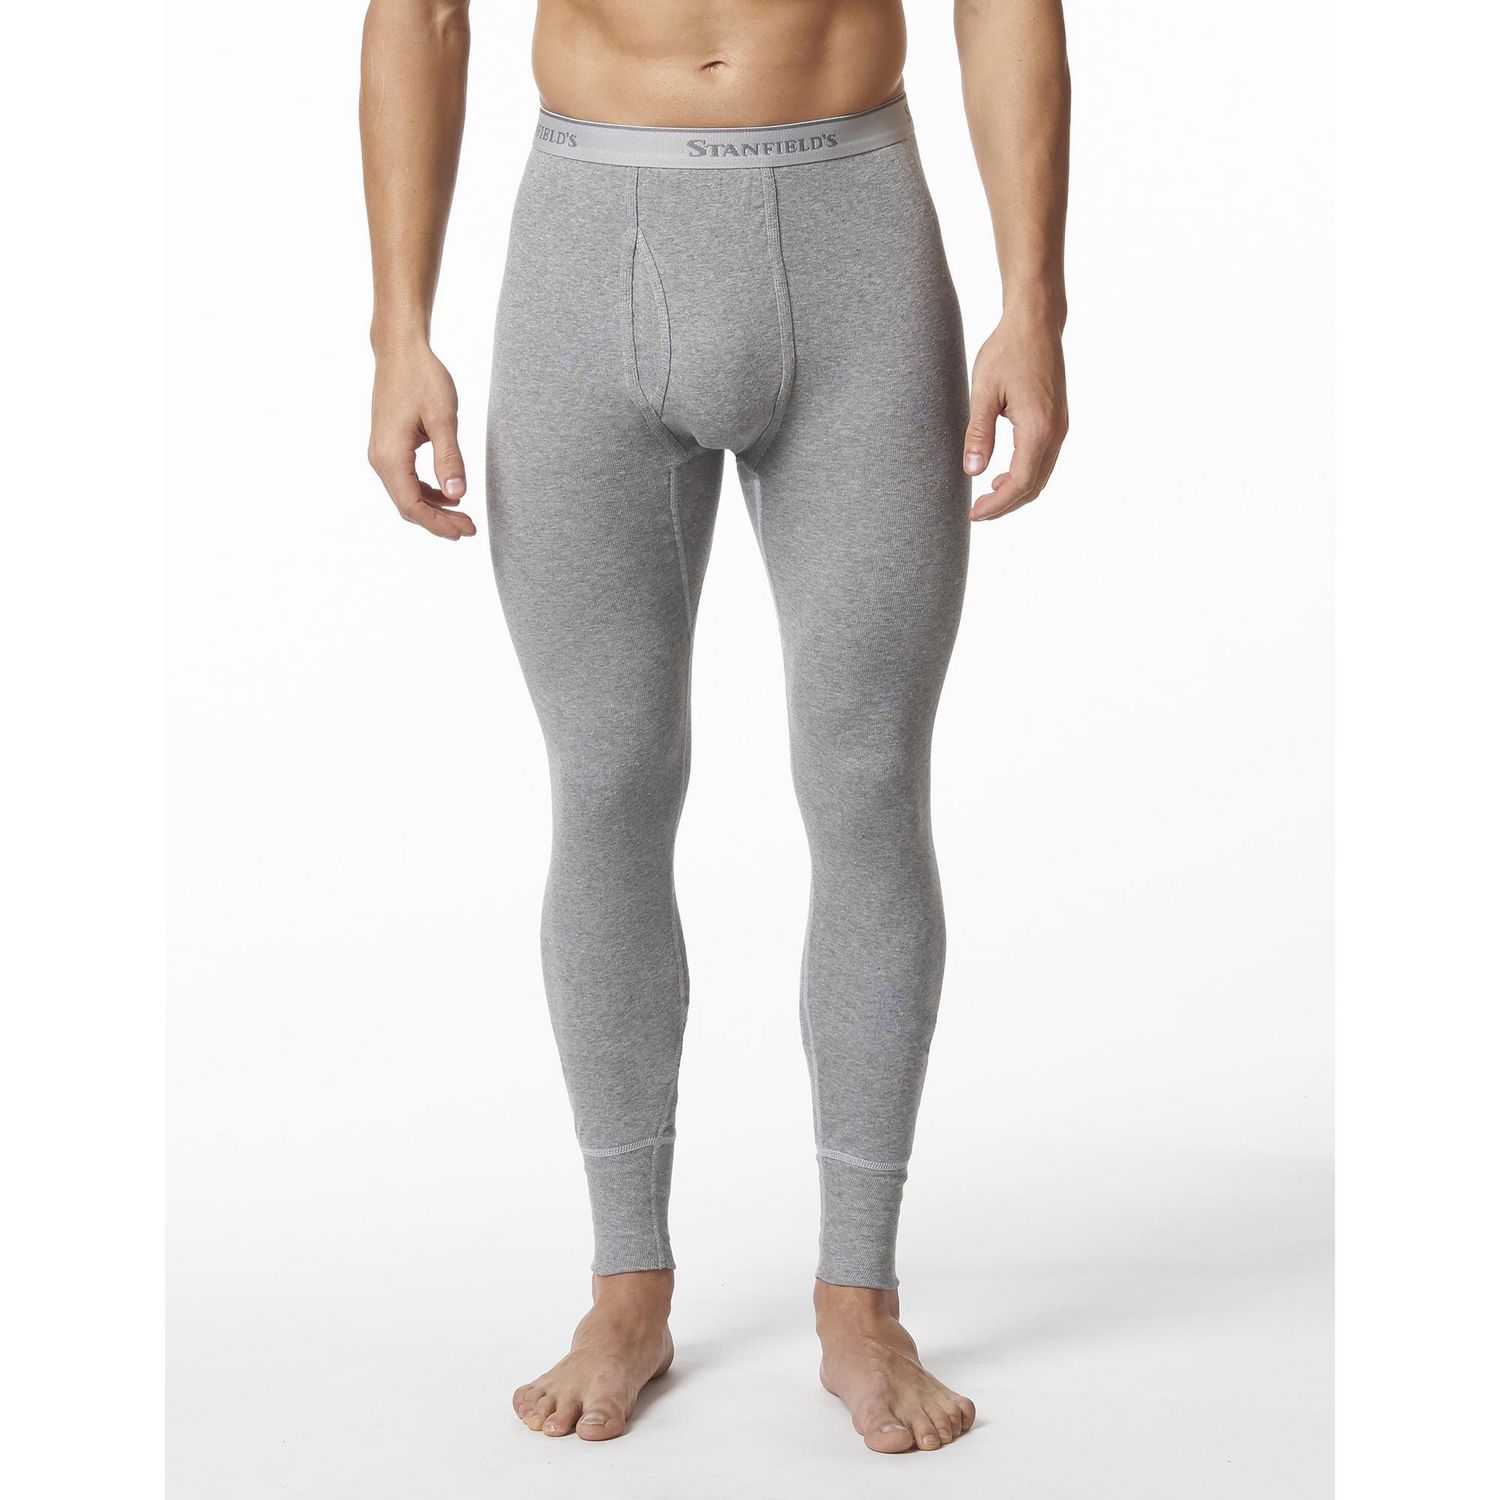 LONG JOHNS THERMAL WITH FLY WHITE LEGGINGS MENS SUB ZERO 